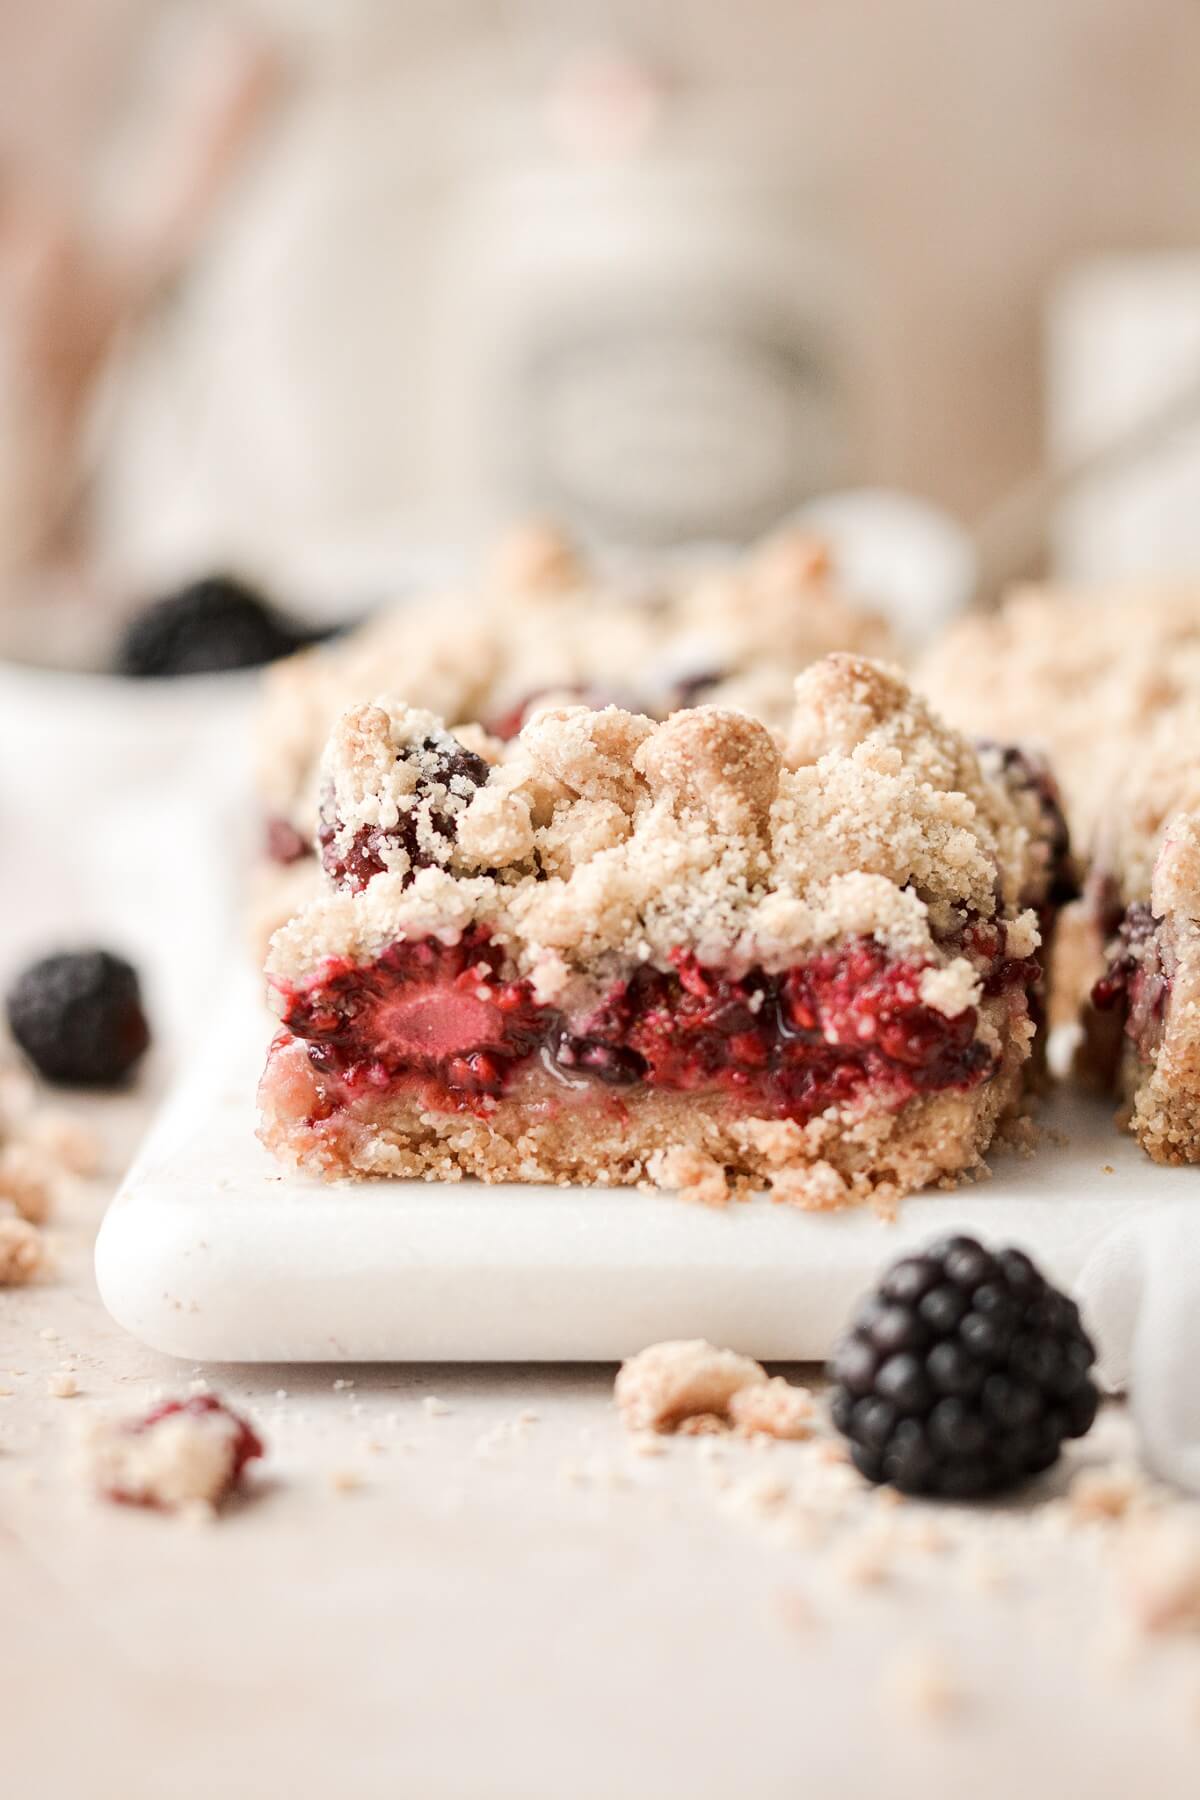 Blackberry pie bar with crumb topping.